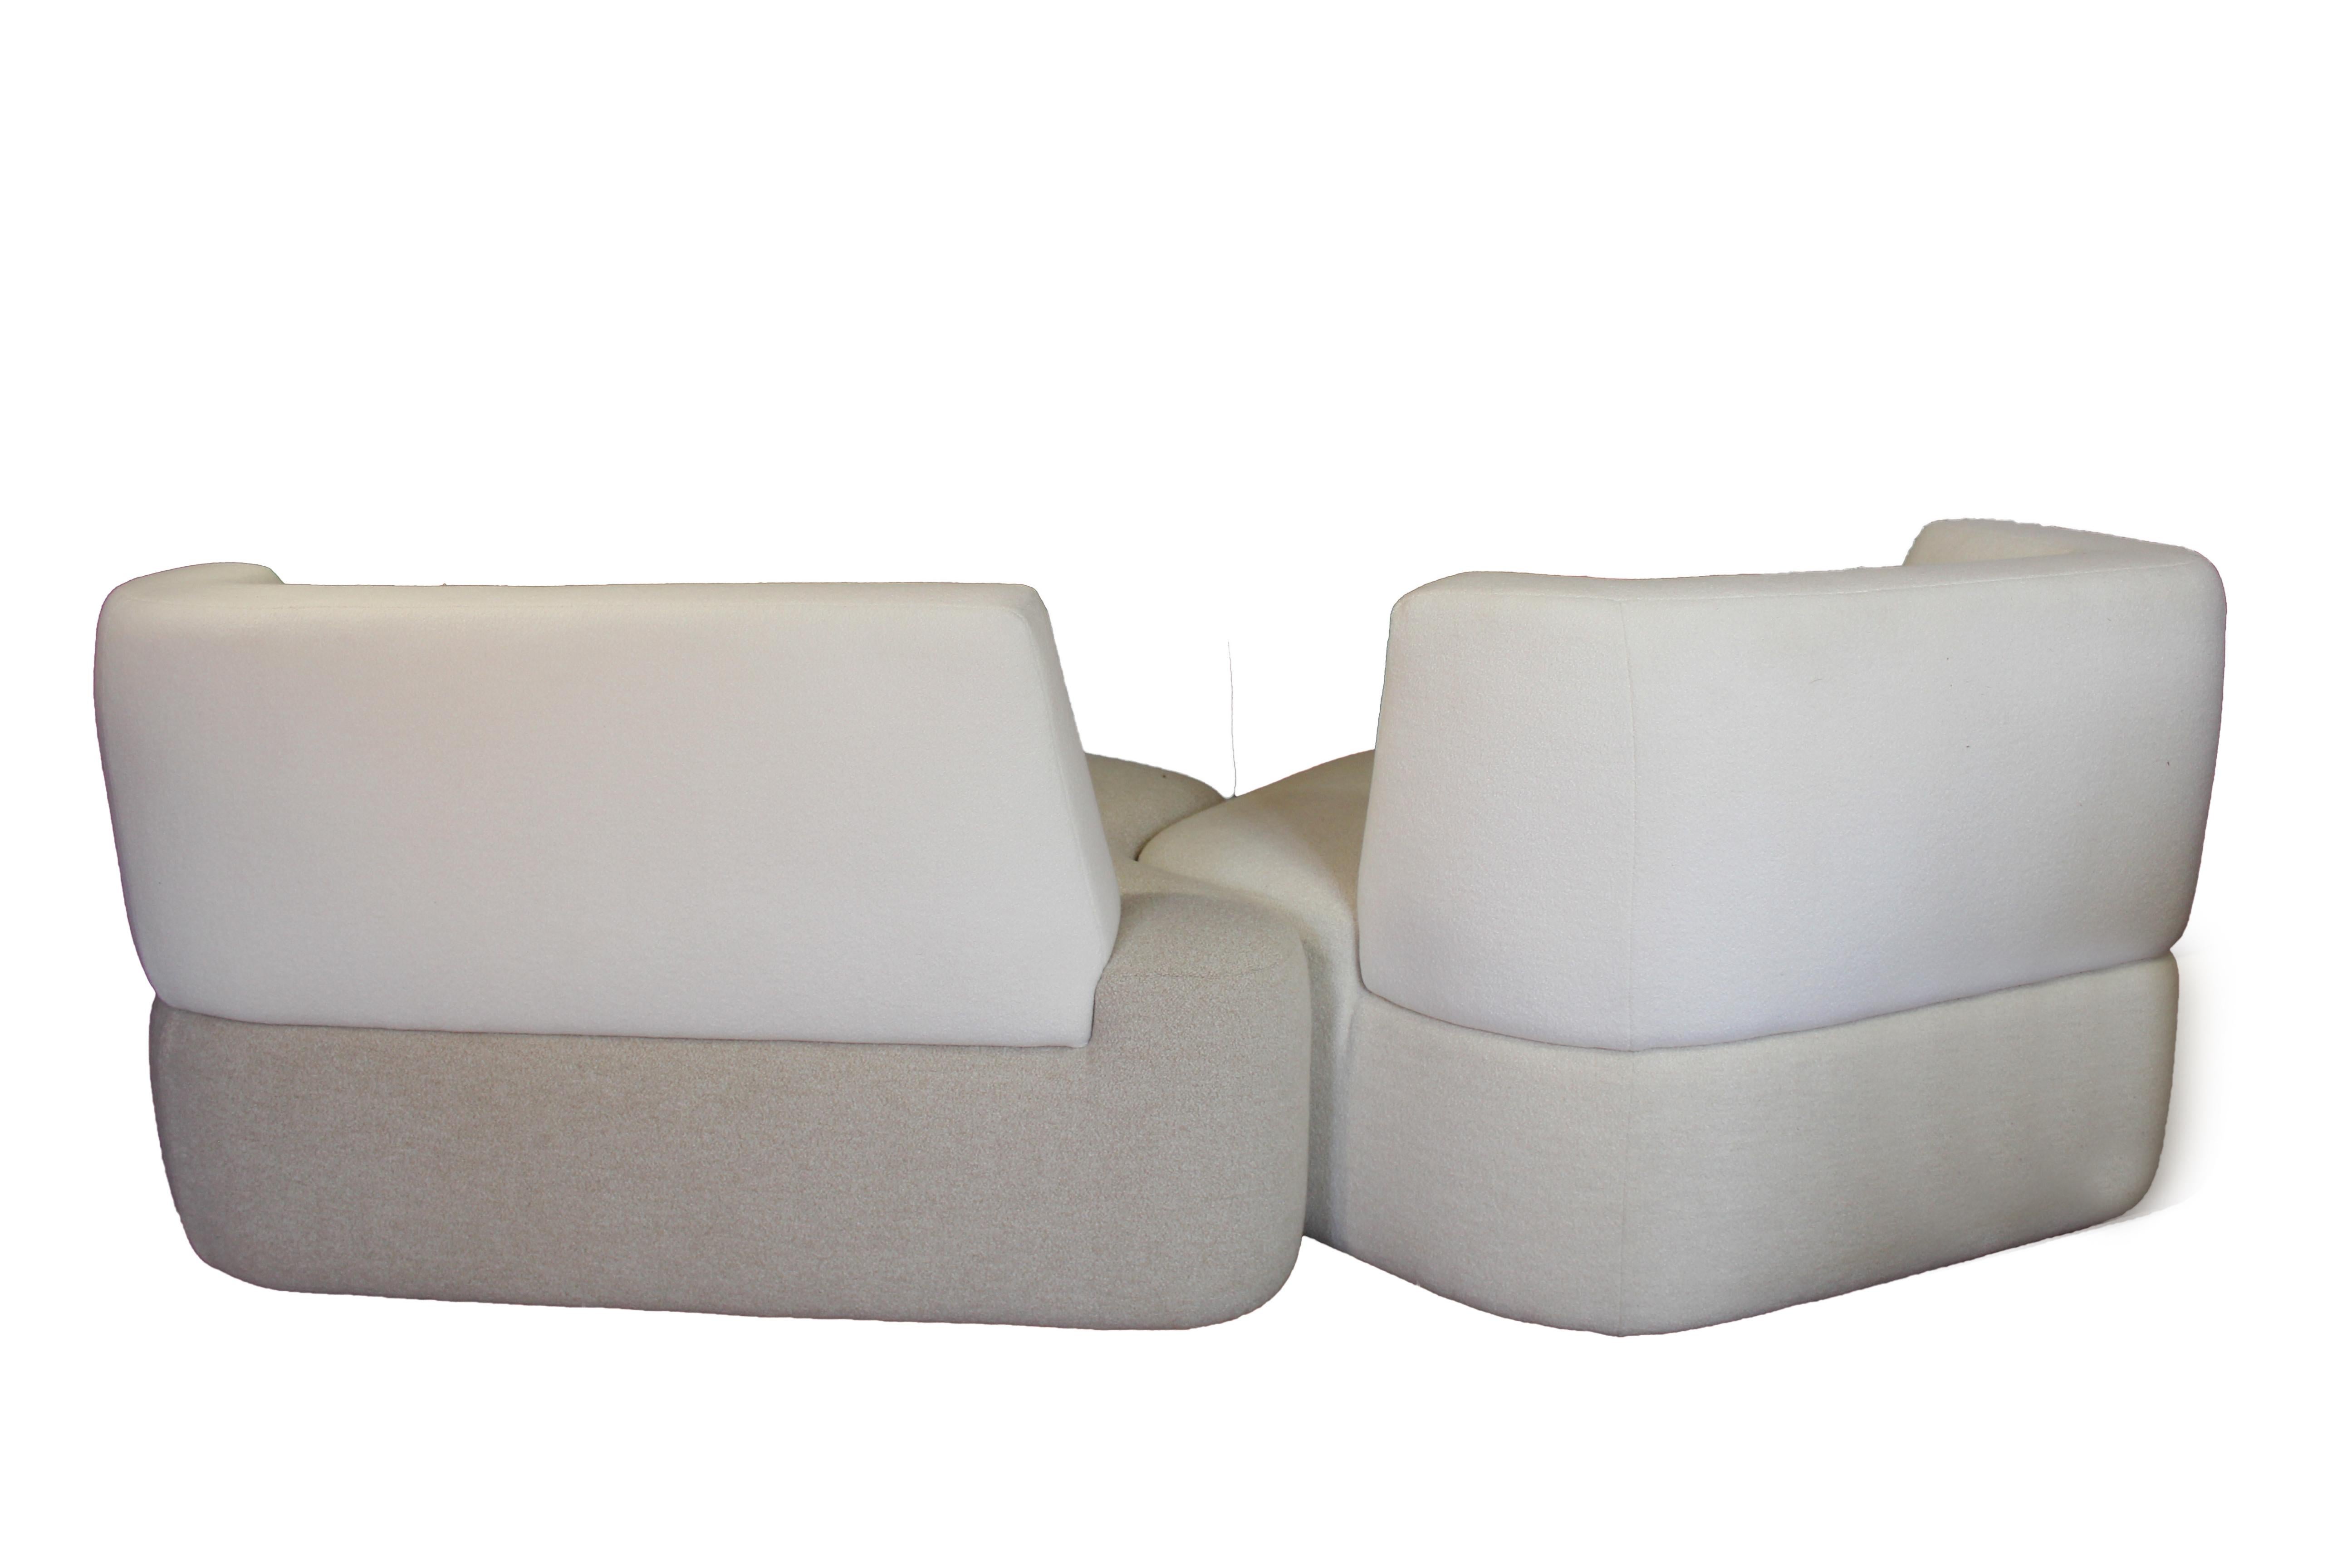 Hand-Crafted Sofa in White Cream Wool 2 Modules Made in France Customizable For Sale